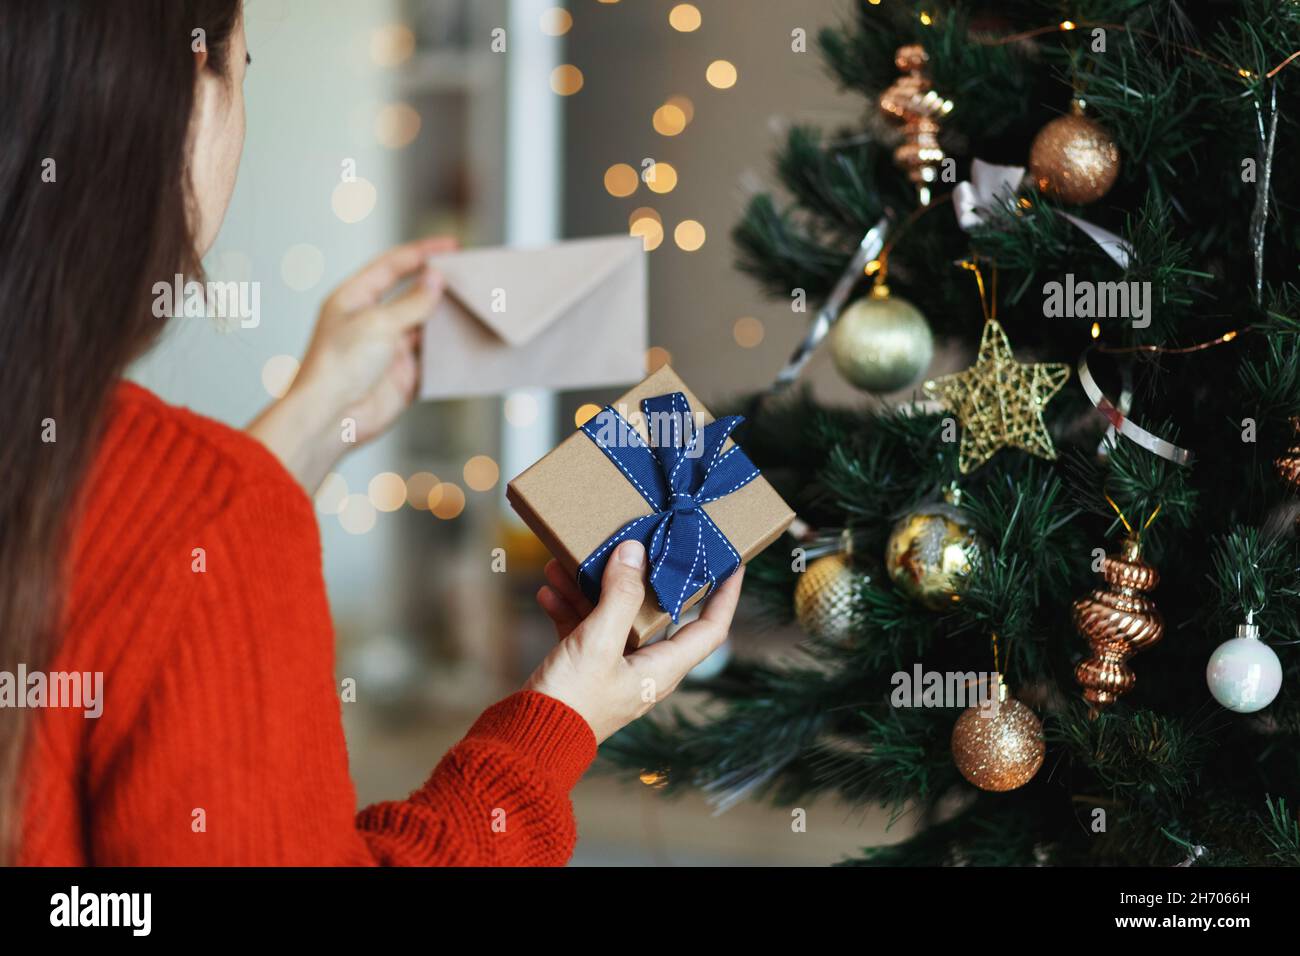 Woman prepare xmas gift box with greeting card or letter for family, christmas tree background. Stock Photo